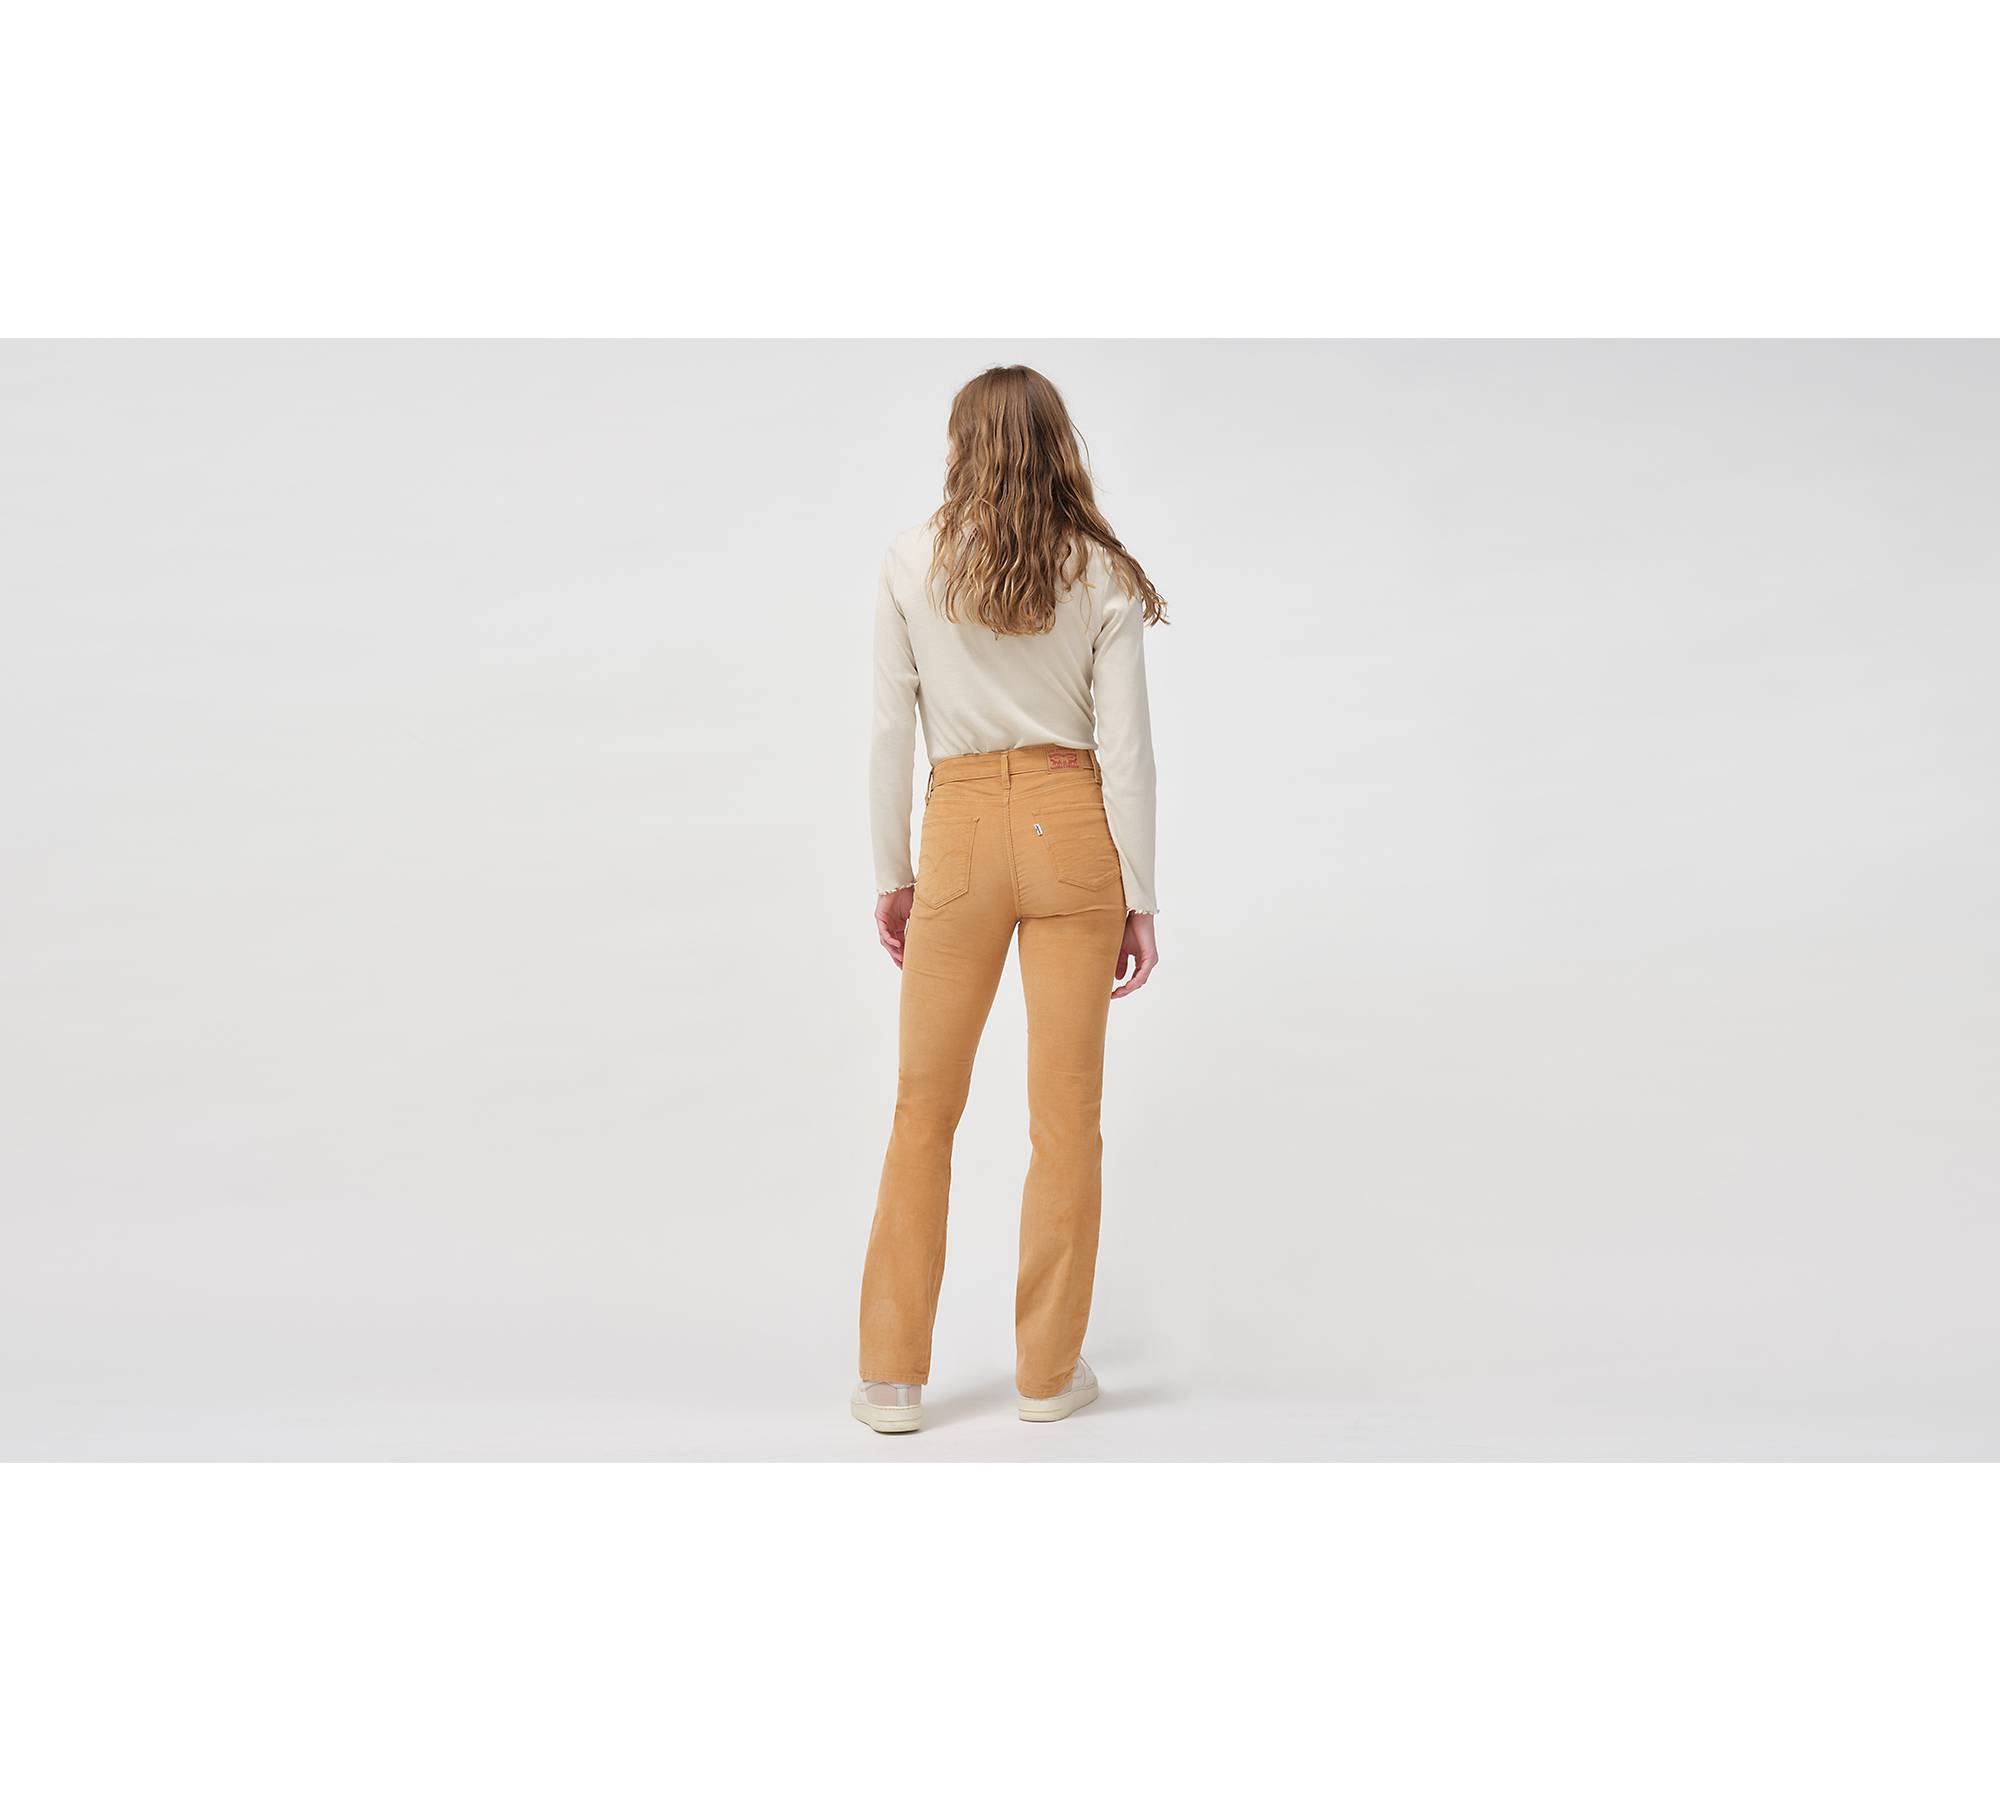 Brown flare pants / bootcut corduroy jeans